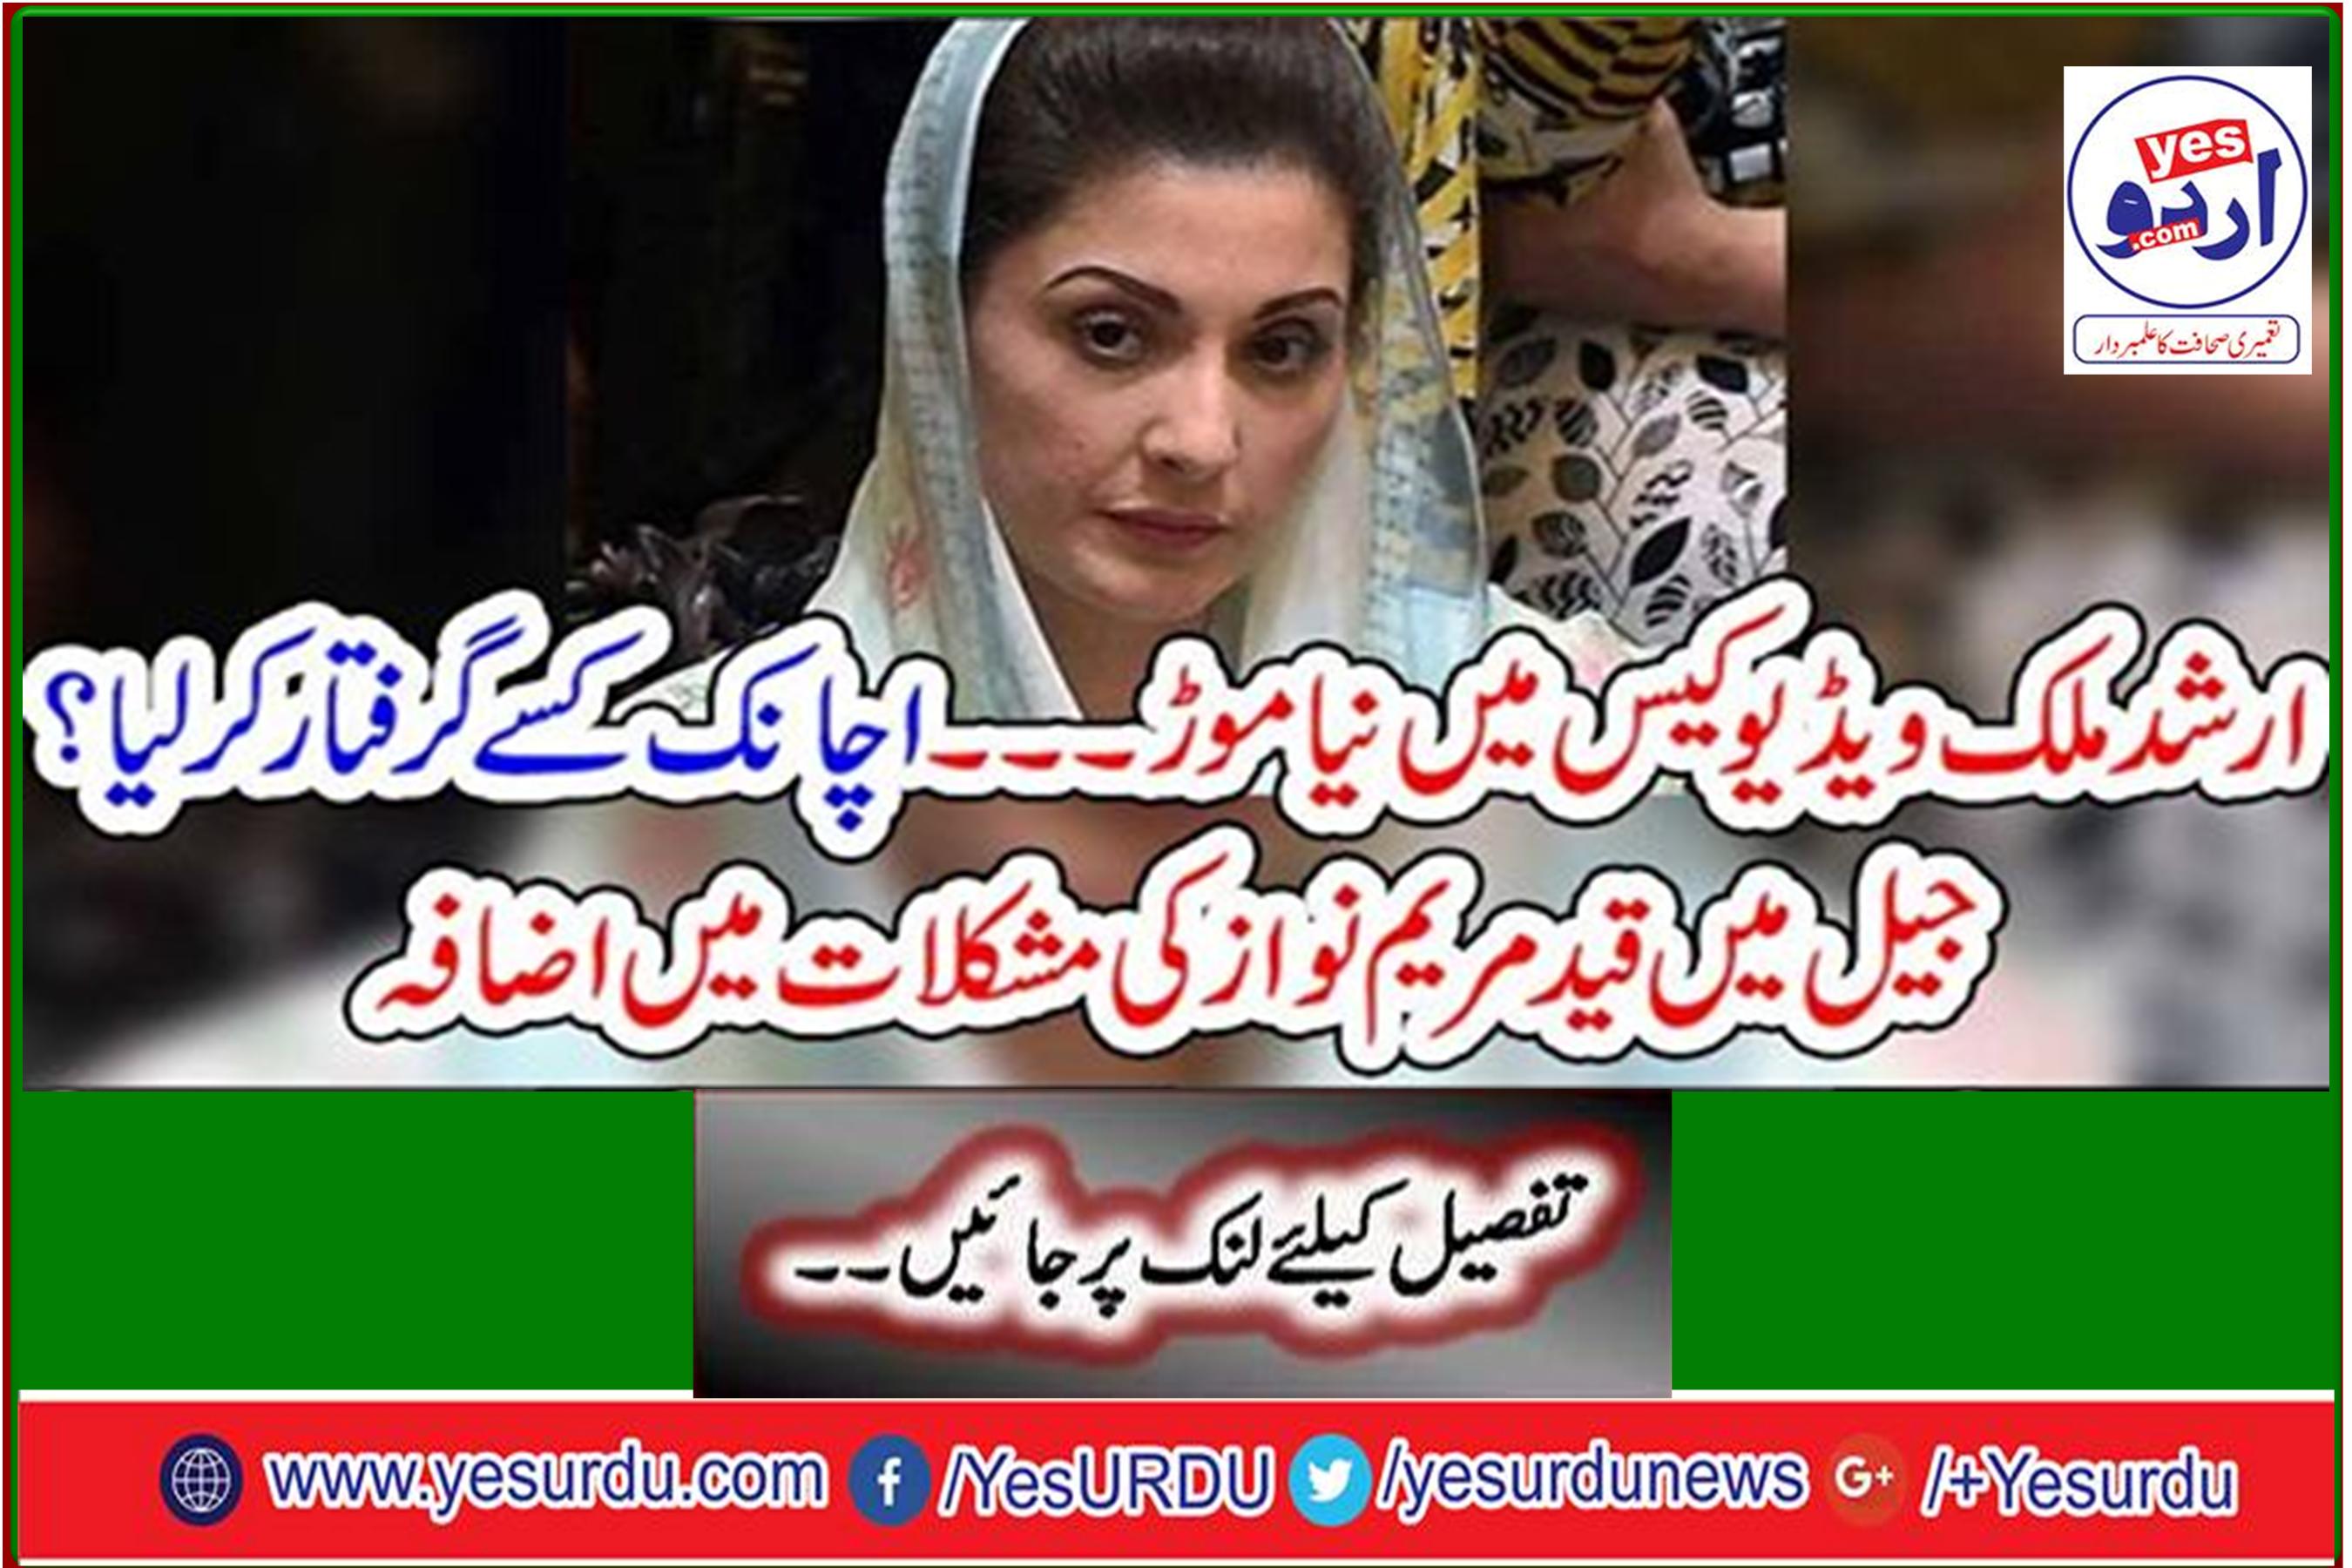 New twist in Arshad Malik video case - Who arrested someone suddenly? Maryam Nawaz's confinement in prison escalates